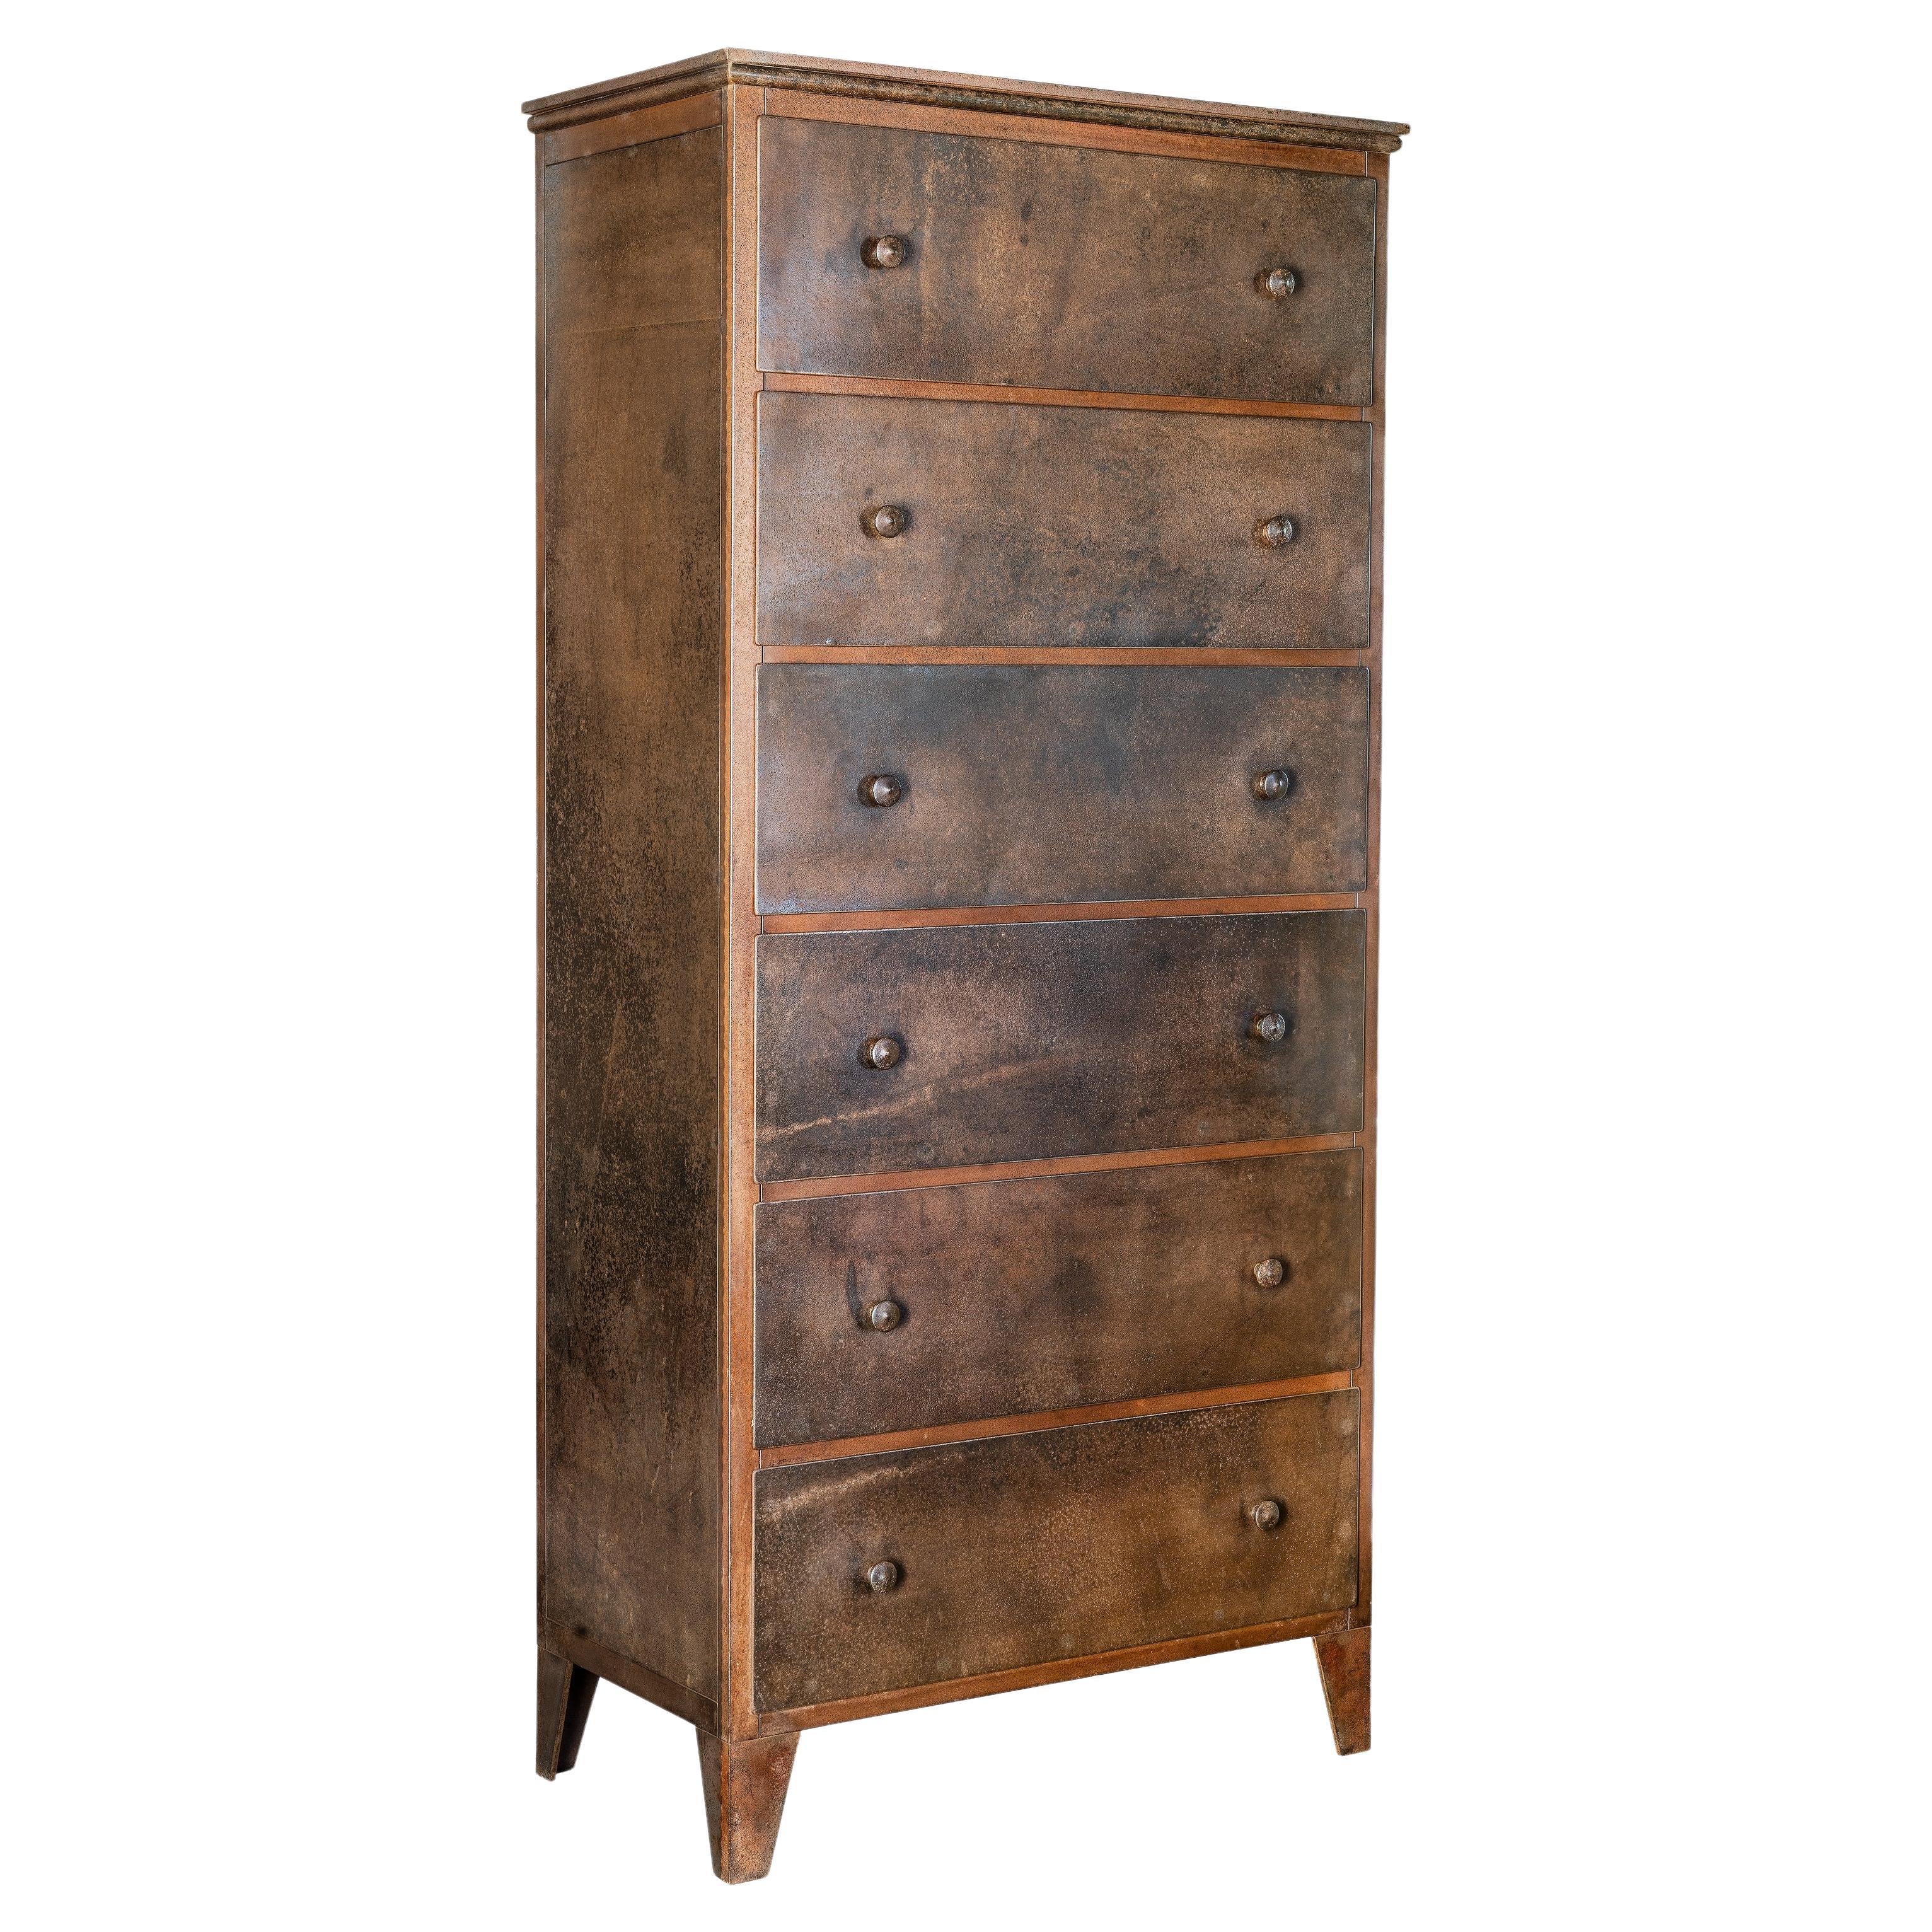 Jim Rose - Shaker Inspired Chest of Drawers, Steel Furniture Natural Rust Patina For Sale